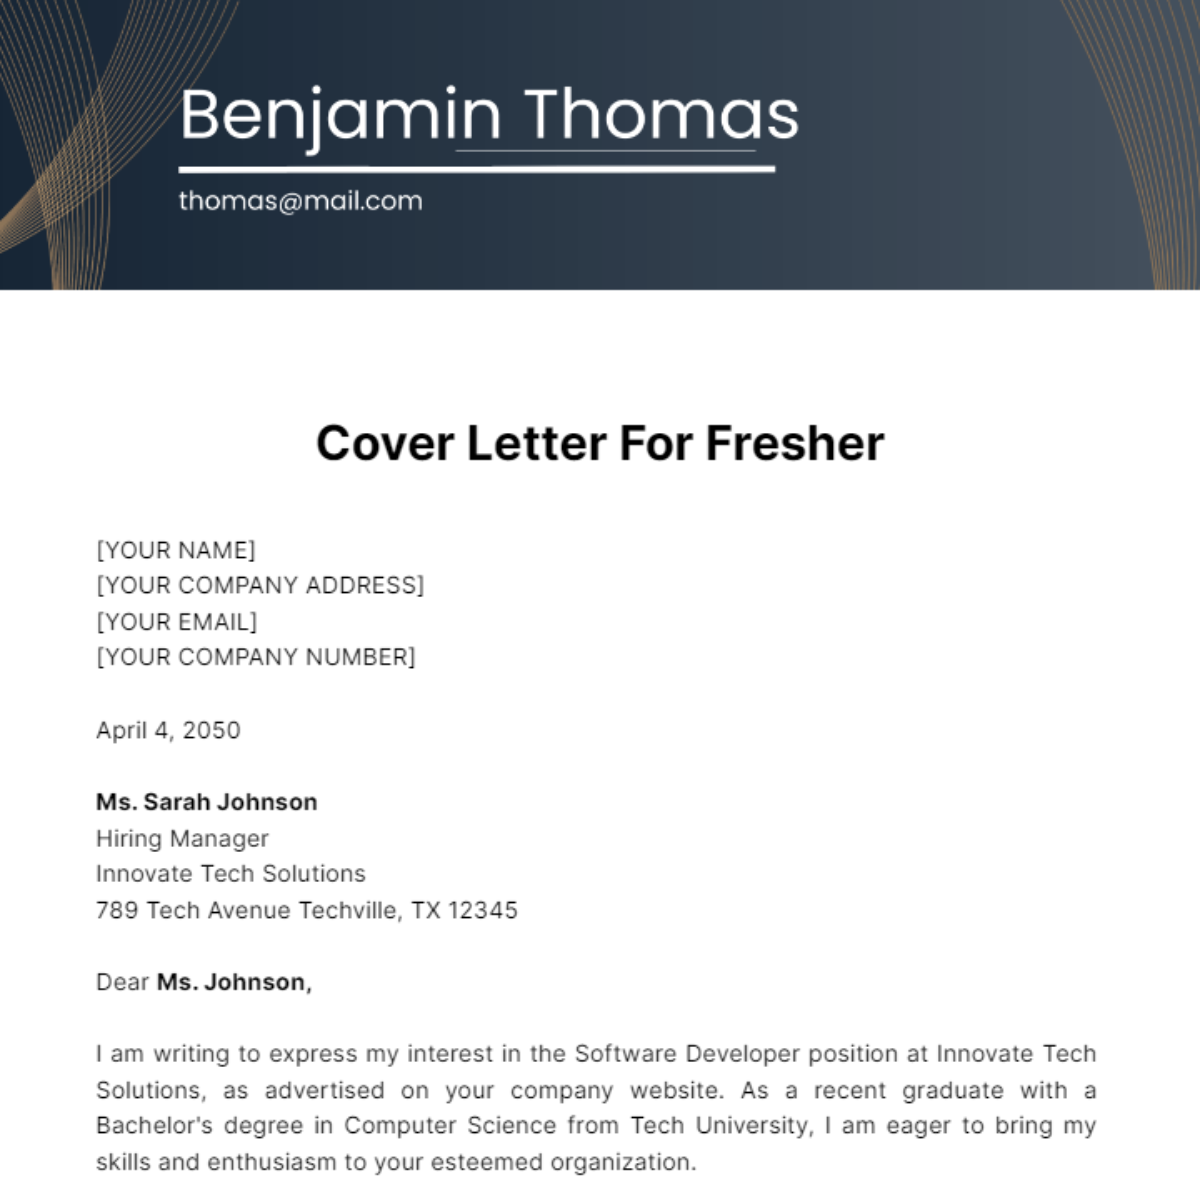 Cover Letter For Fresher Template